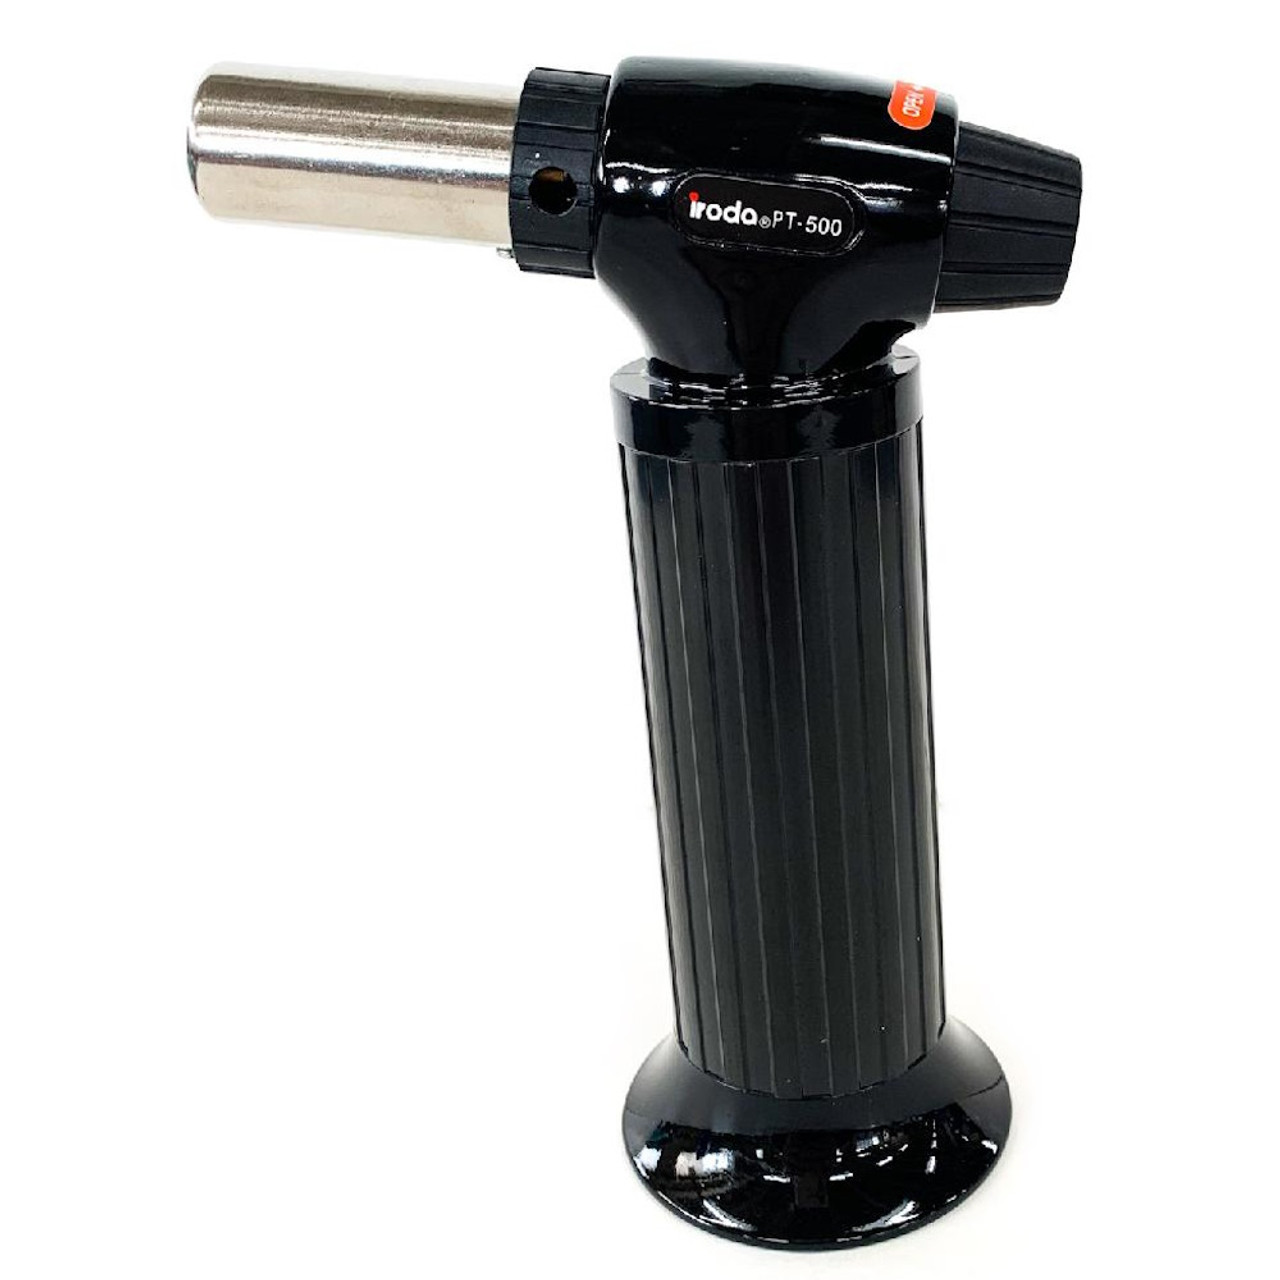 Hand held, professional torch with adjustable flame for precision use!